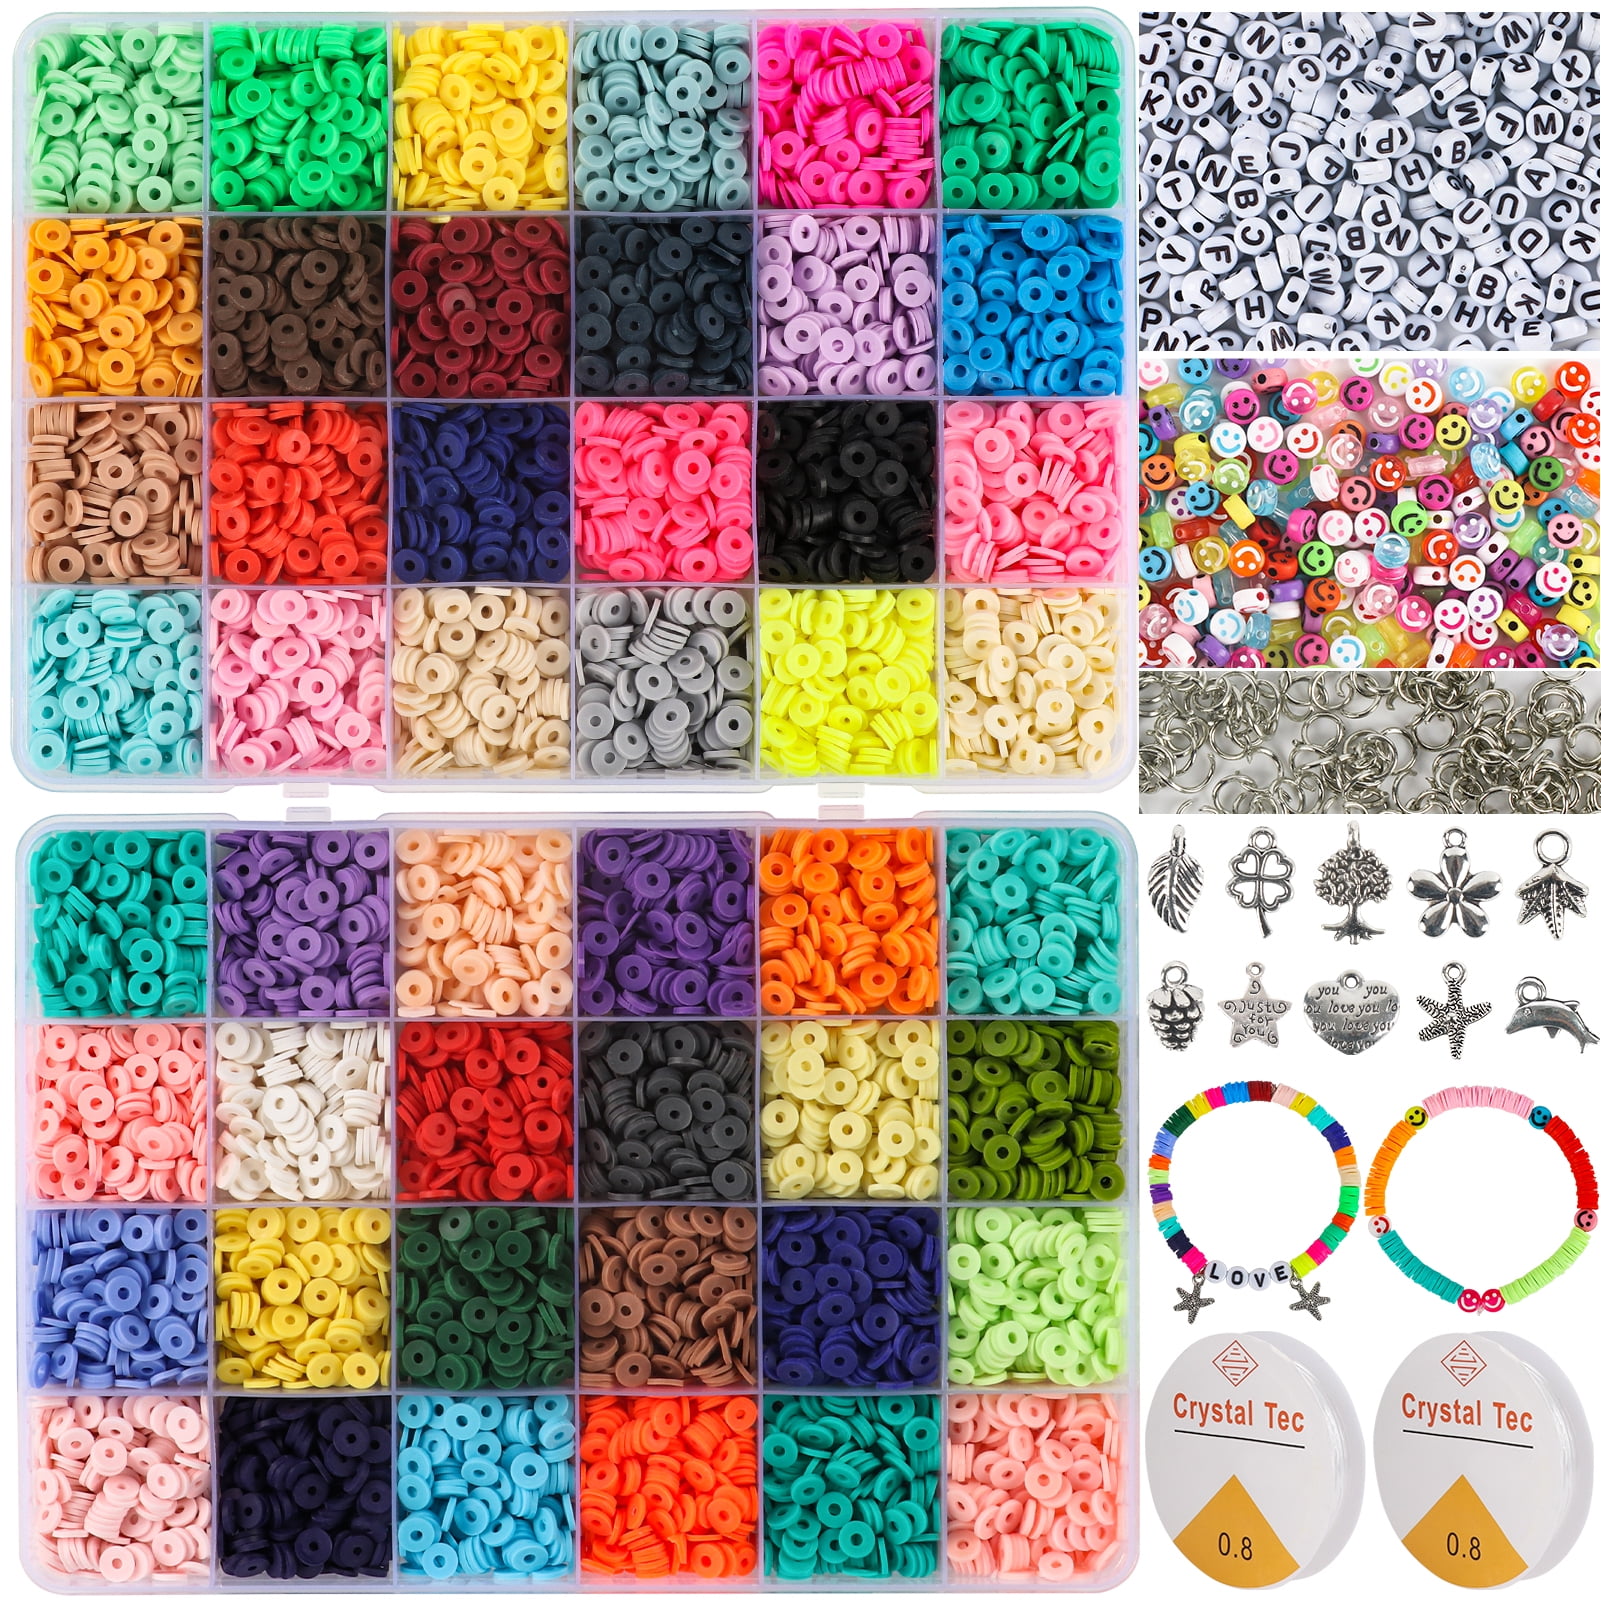 ARTDOT 5342 PCS Clay Beads Bracelet Making Kit 24 Colors Flat Heishi Beads  for Jewelry Making with Accessories Crafts for Girls Ages 8-12